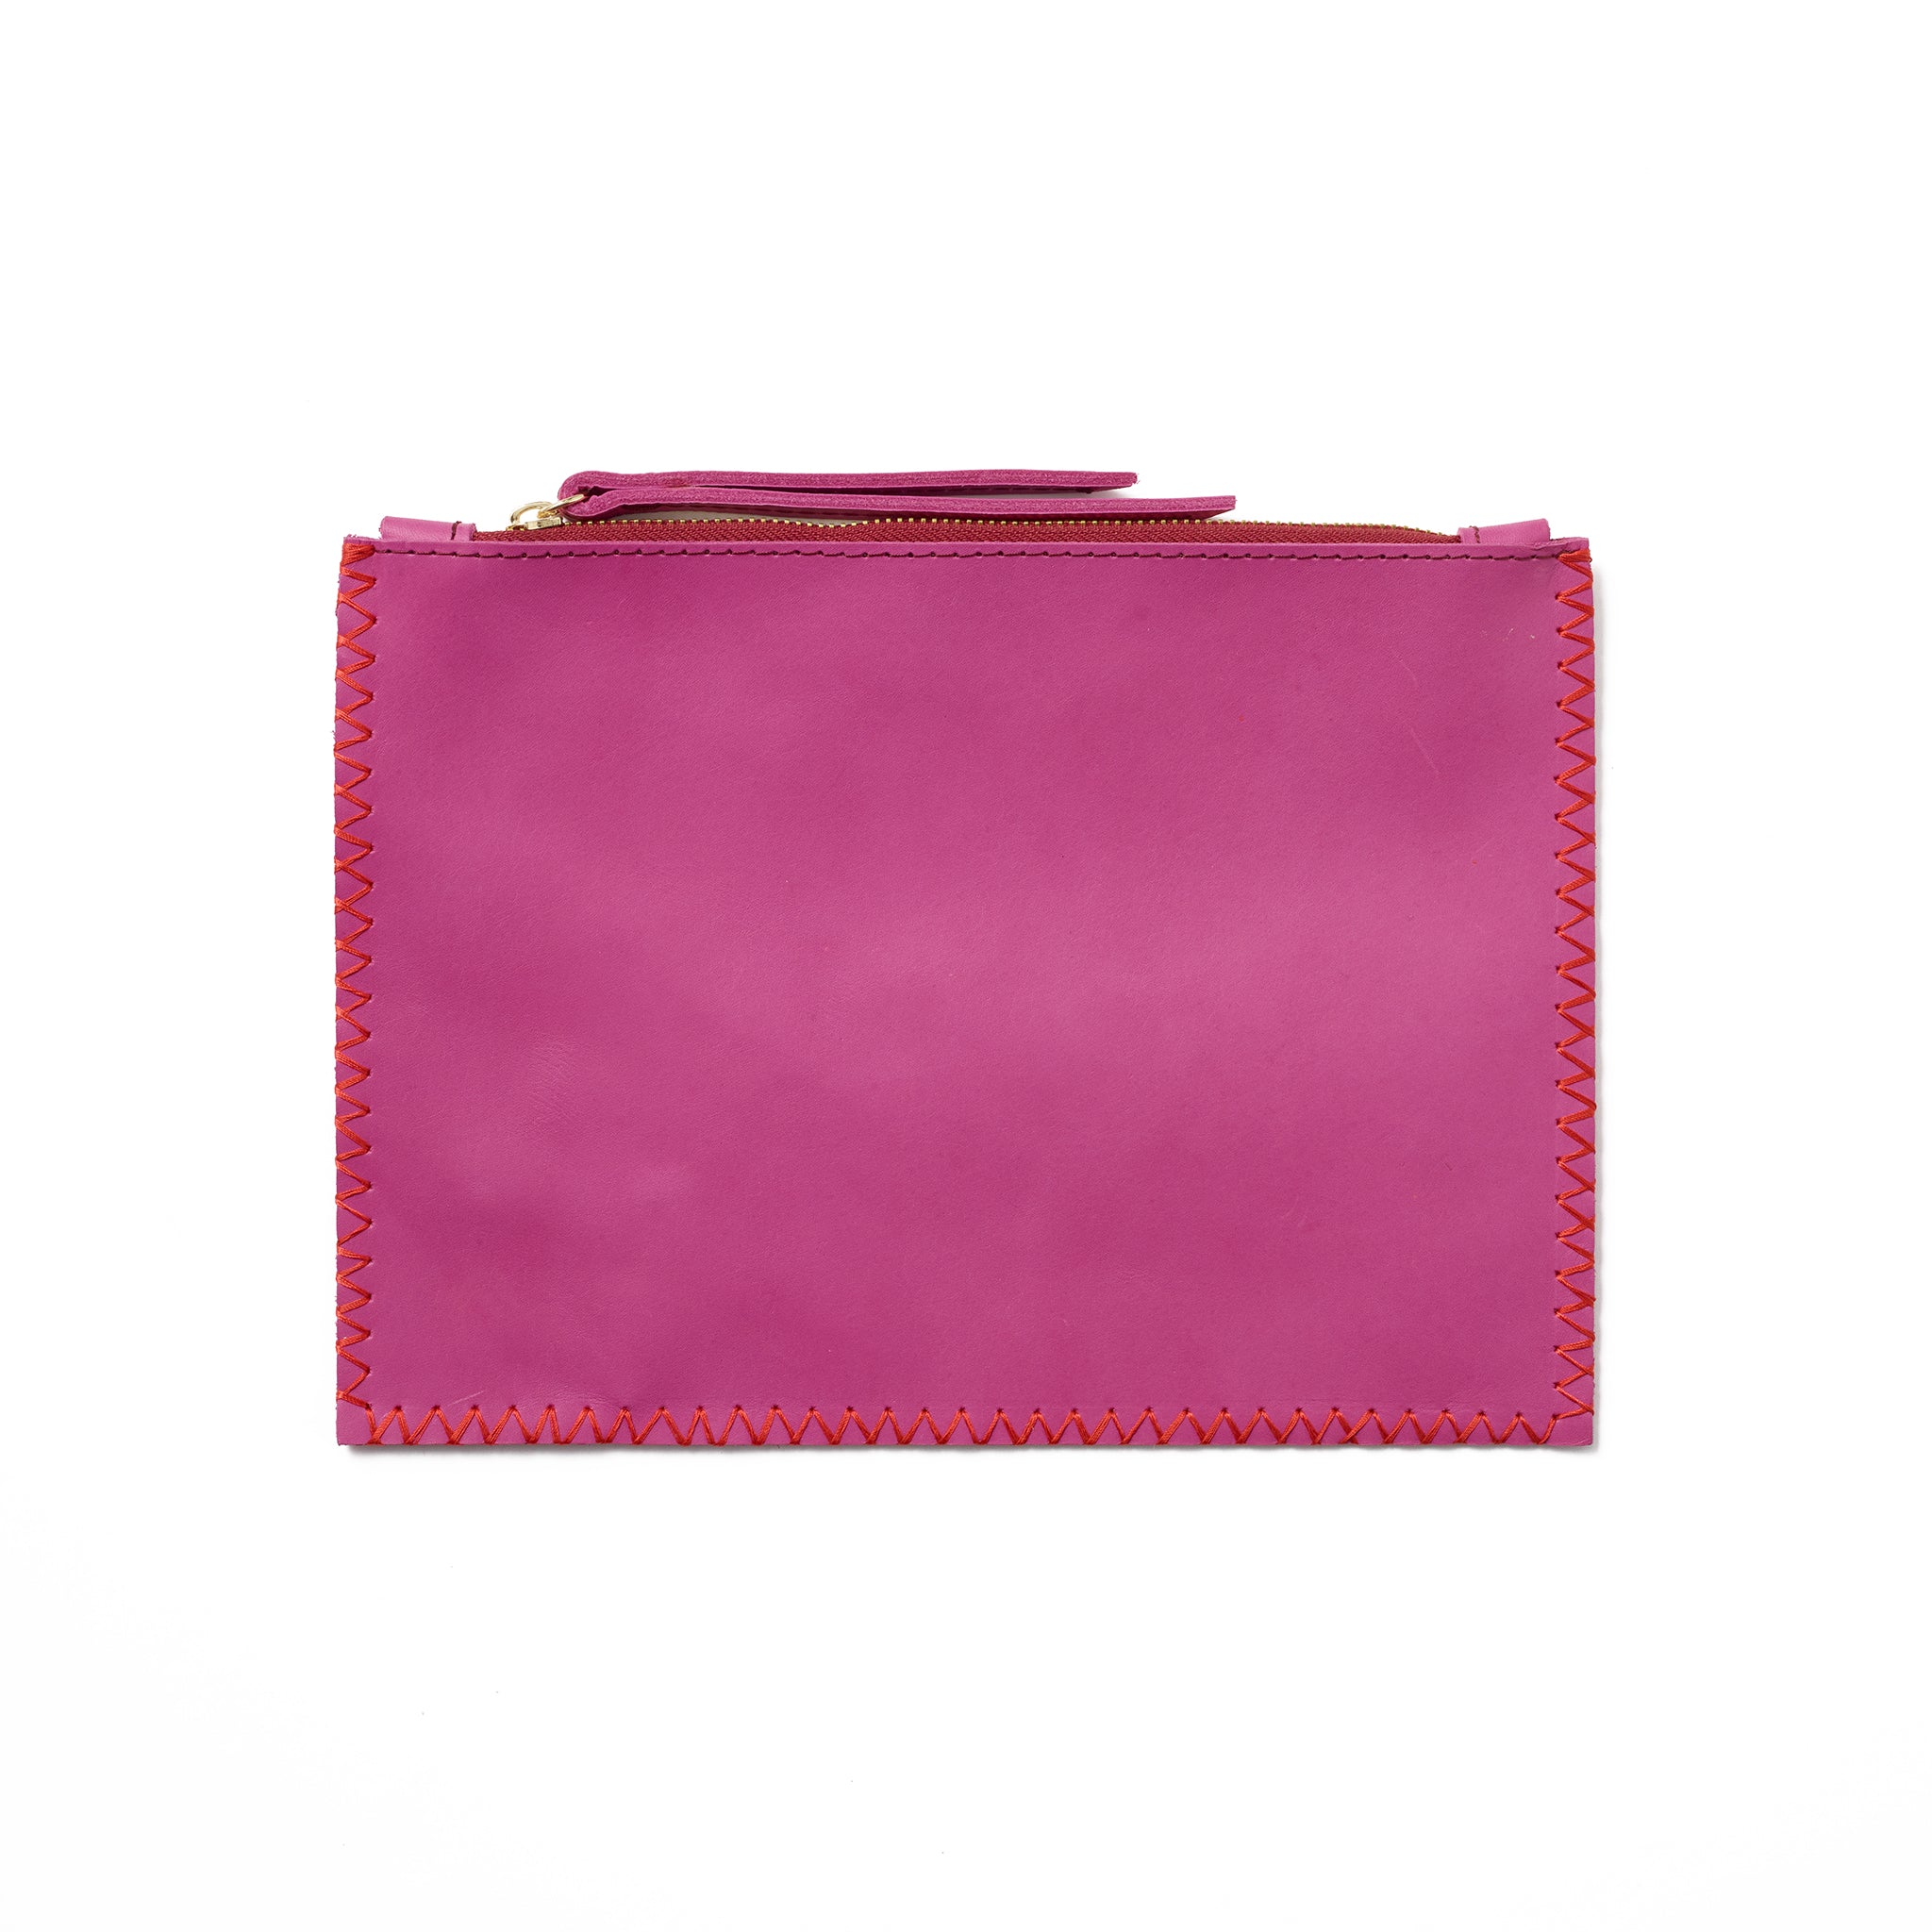 An pink pouch with understated contrast stitching, handcrafted from sustainable leather.